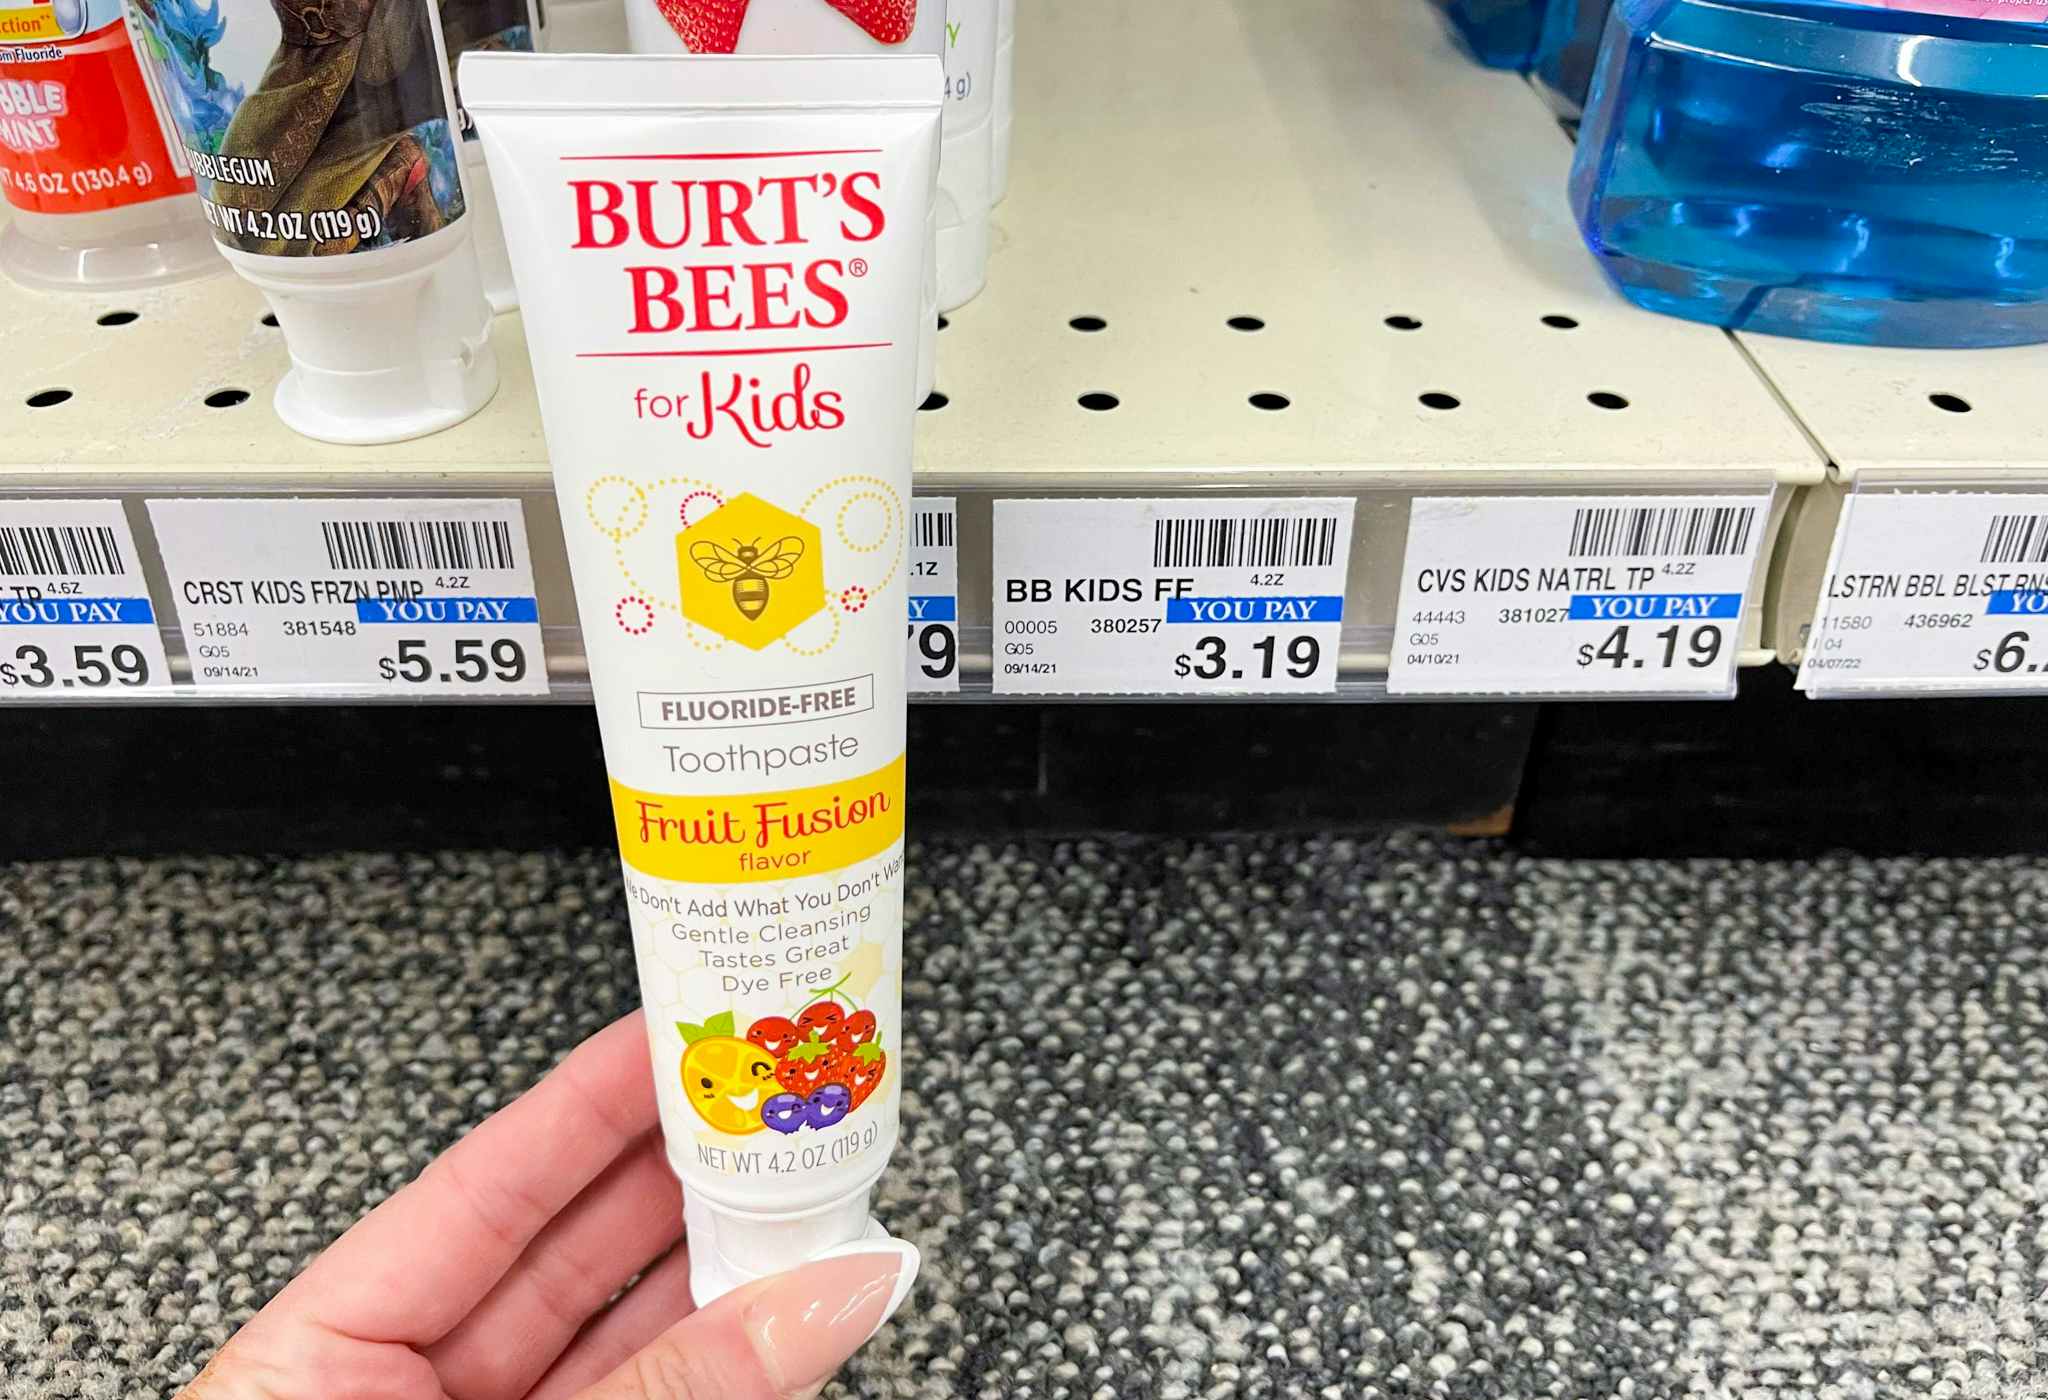 cvs-burts-bees-for-kids-toothpaste-2022